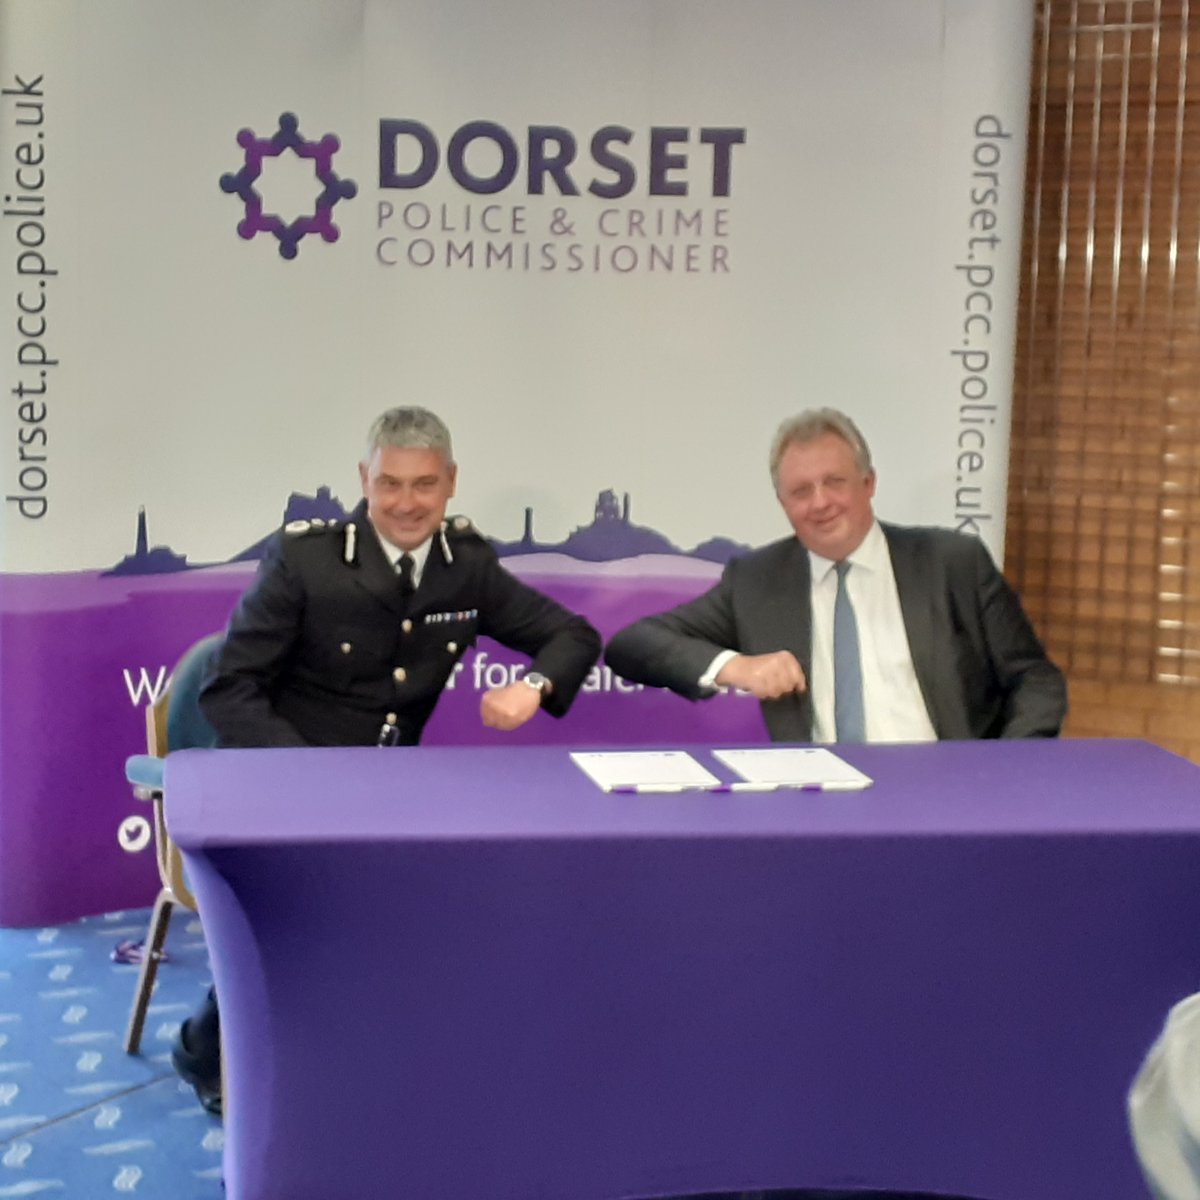 Incredibly proud to have been elected as the Police and Crime Commissioner for Dorset.
Thank you to all the people of Dorset who voted
Thank you to all those who supported my campaign.
I now have to deliver for the people of Dorset. #hegetsit